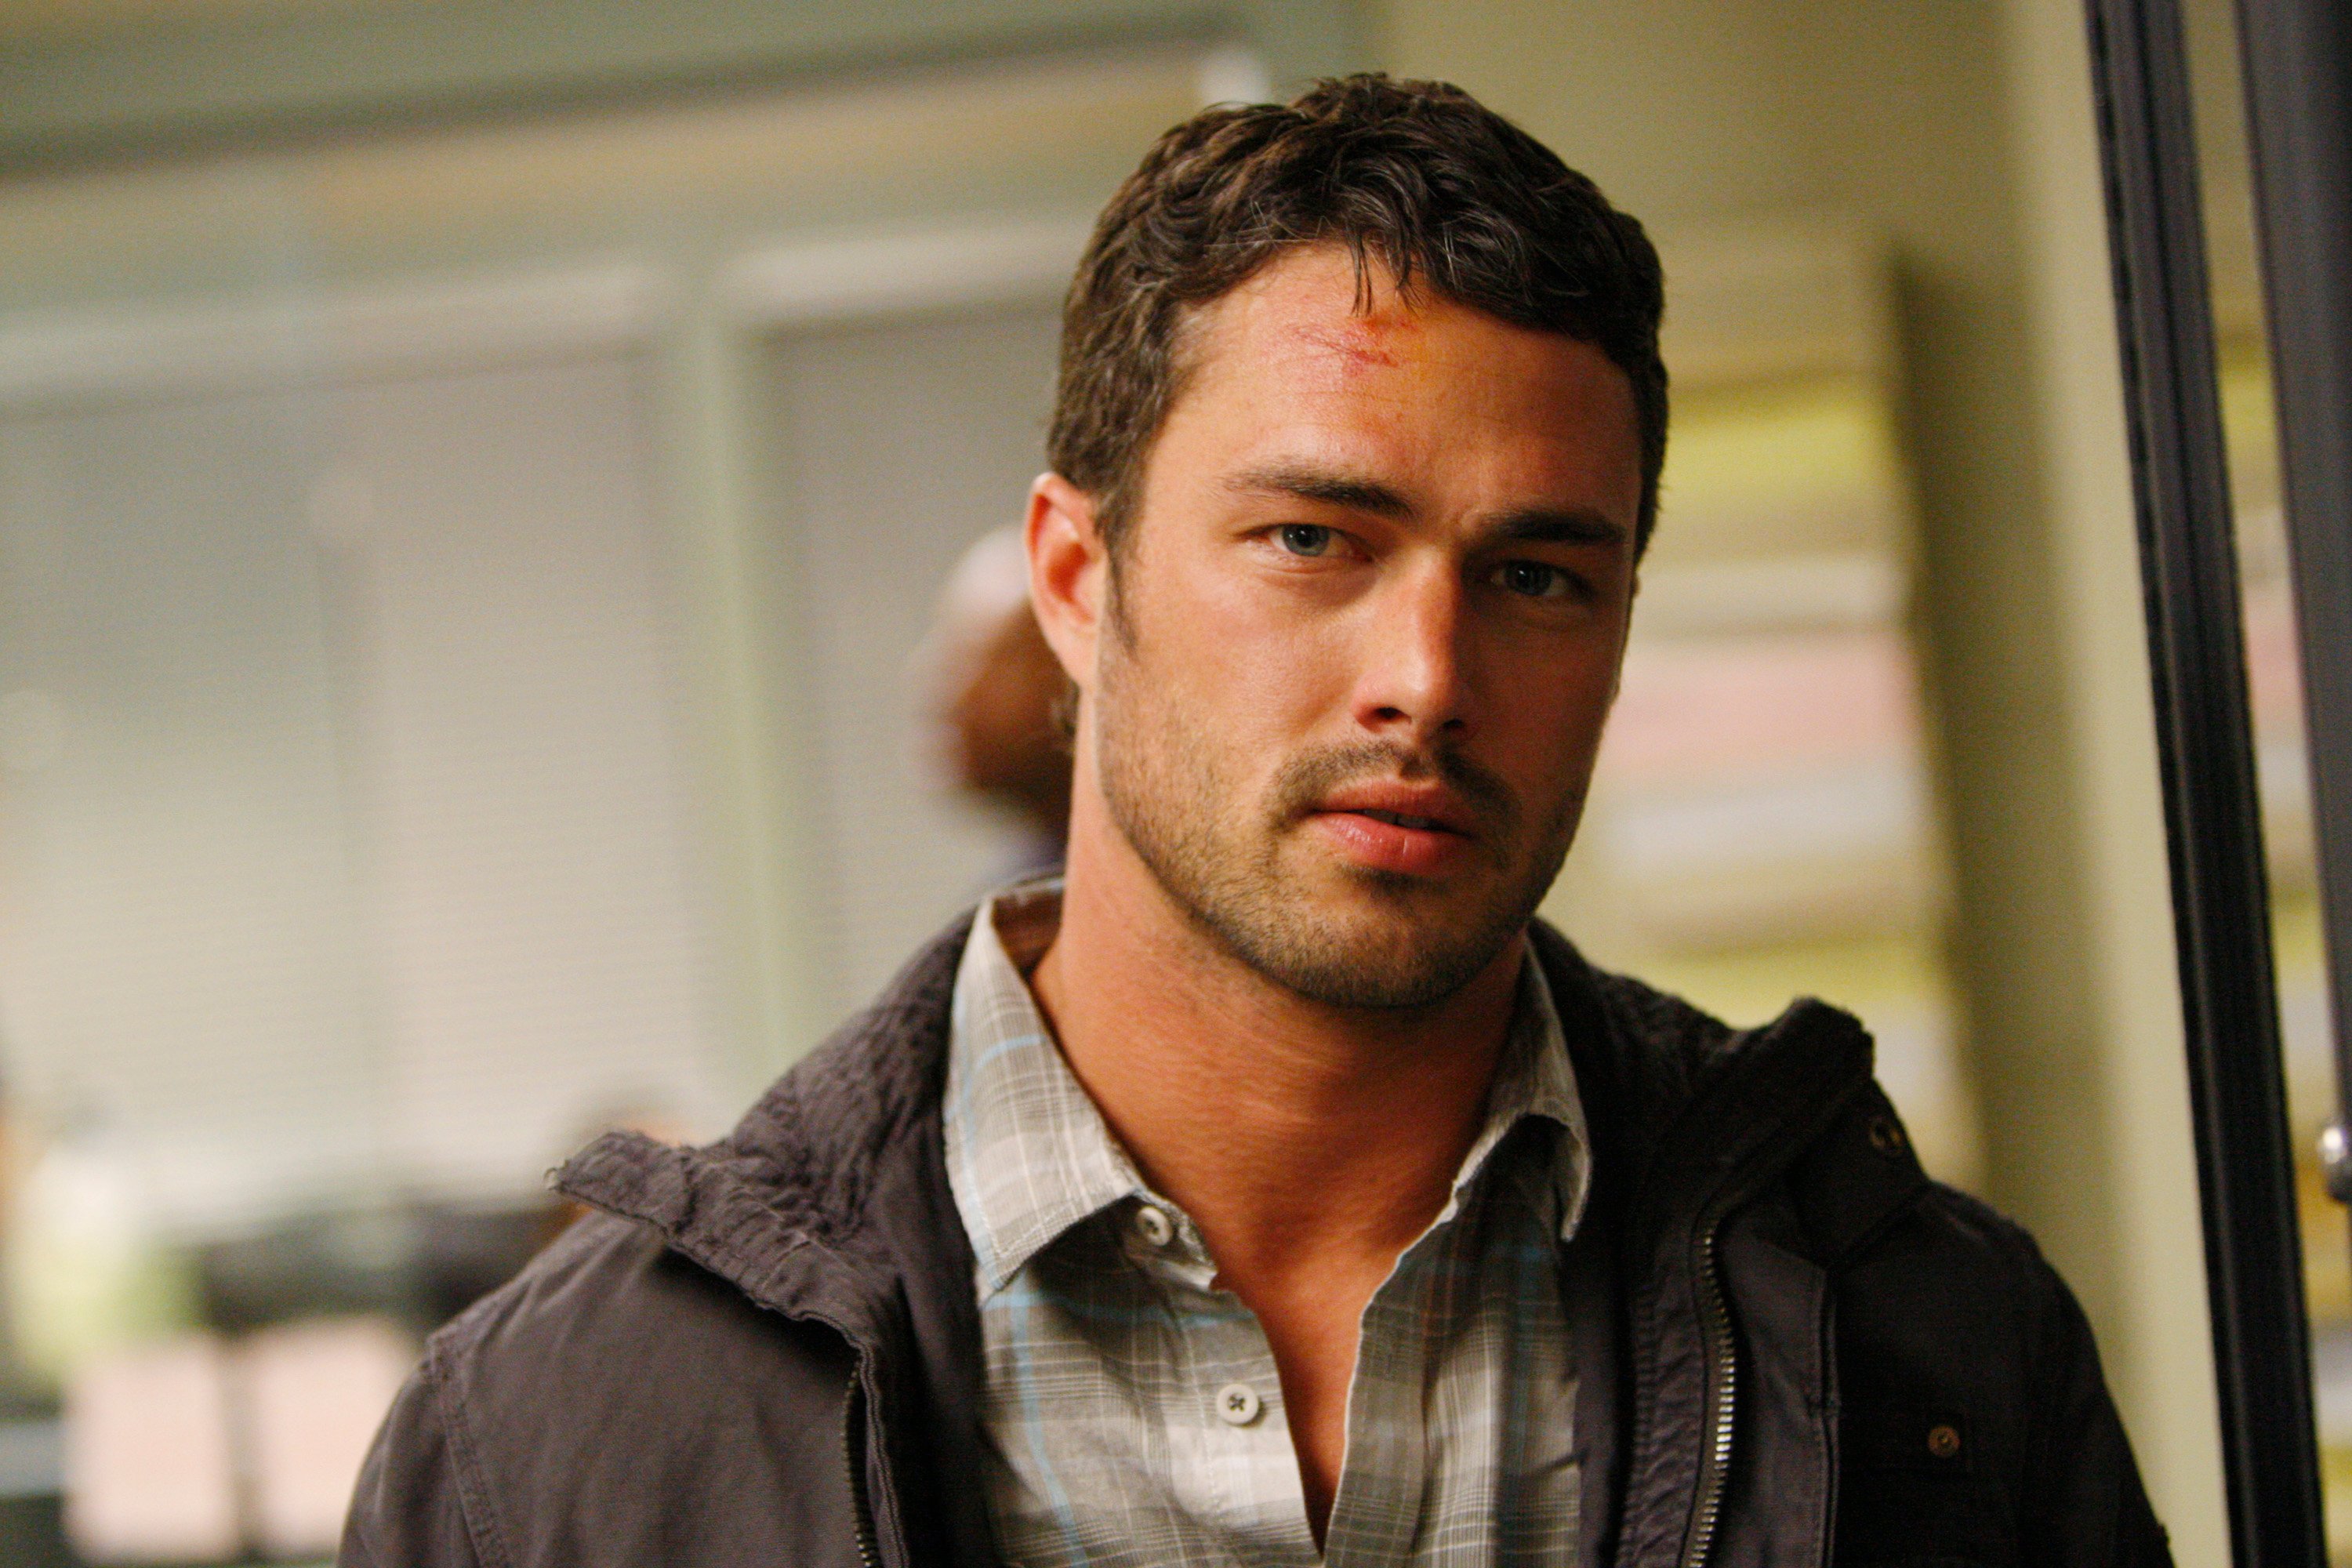 Taylor Kinney |  Chris Haston/NBCU Photo Bank/NBCUniversal via Getty Images via Getty Images